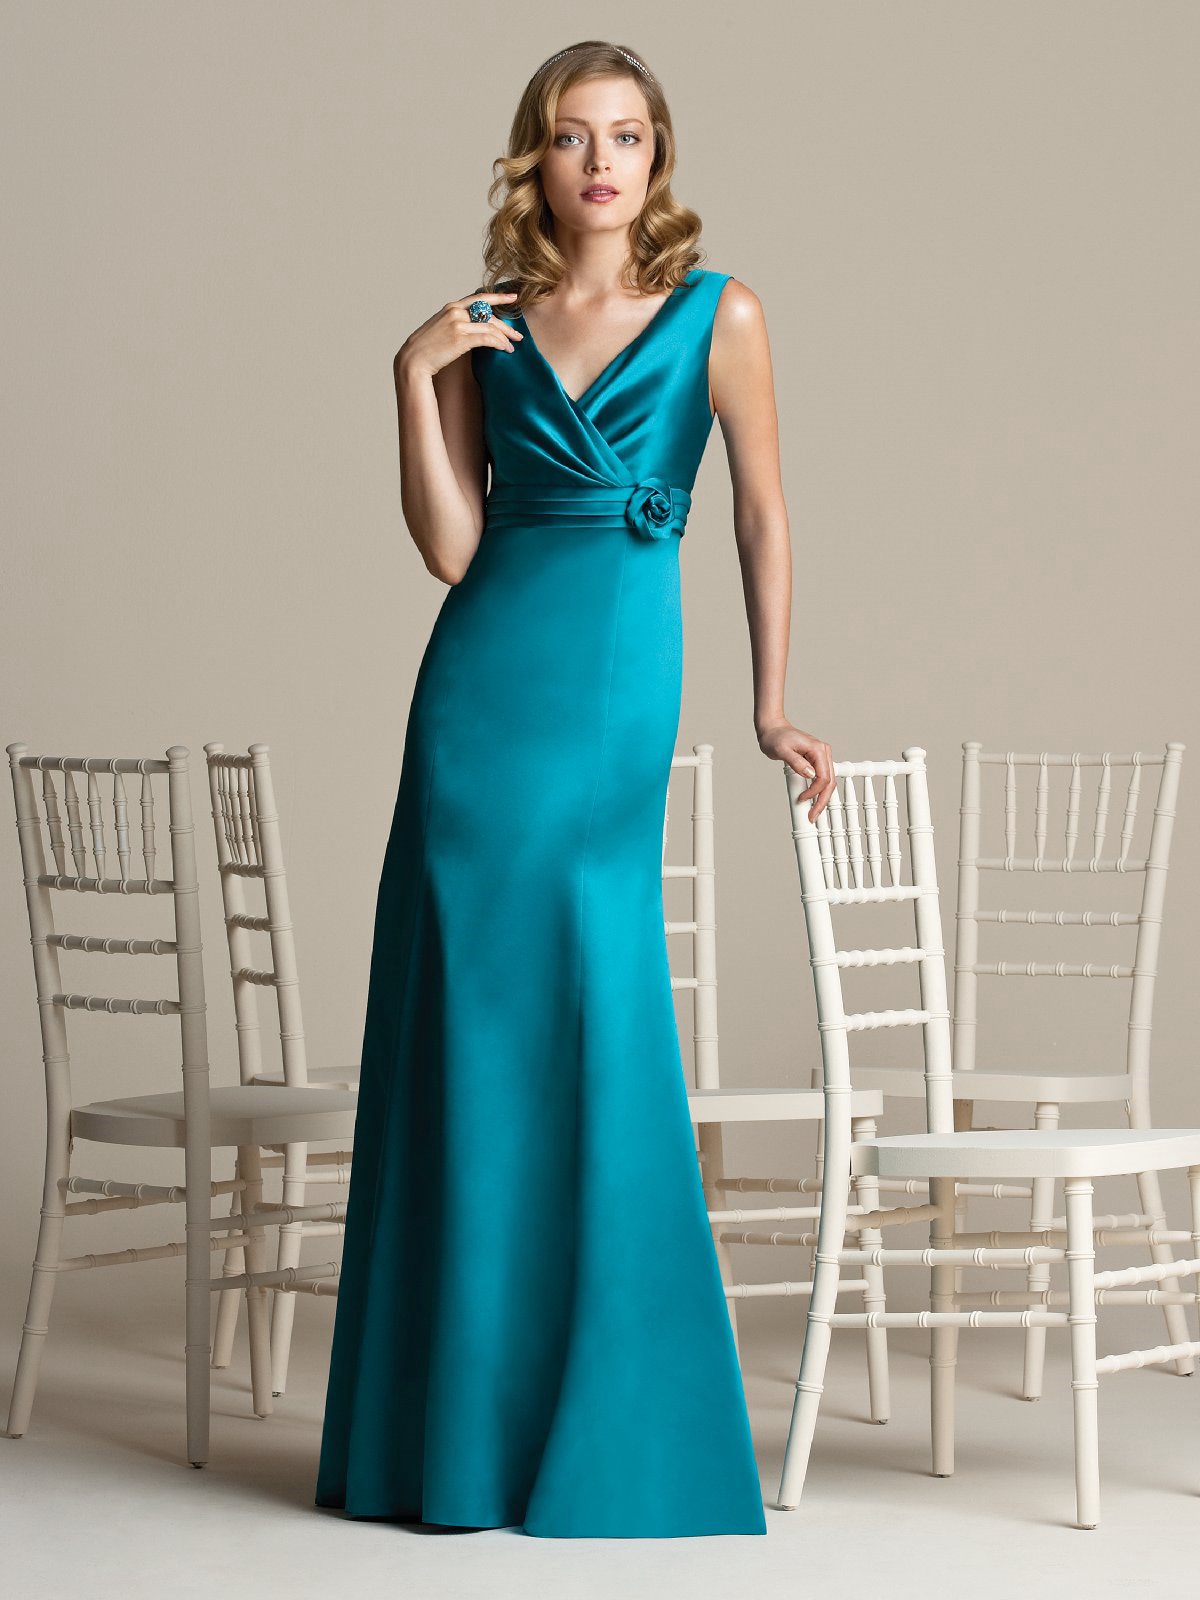 Teal A Line V Neck And Sleeveless Zipper Floor Length Satin Prom Dresses With Belt 